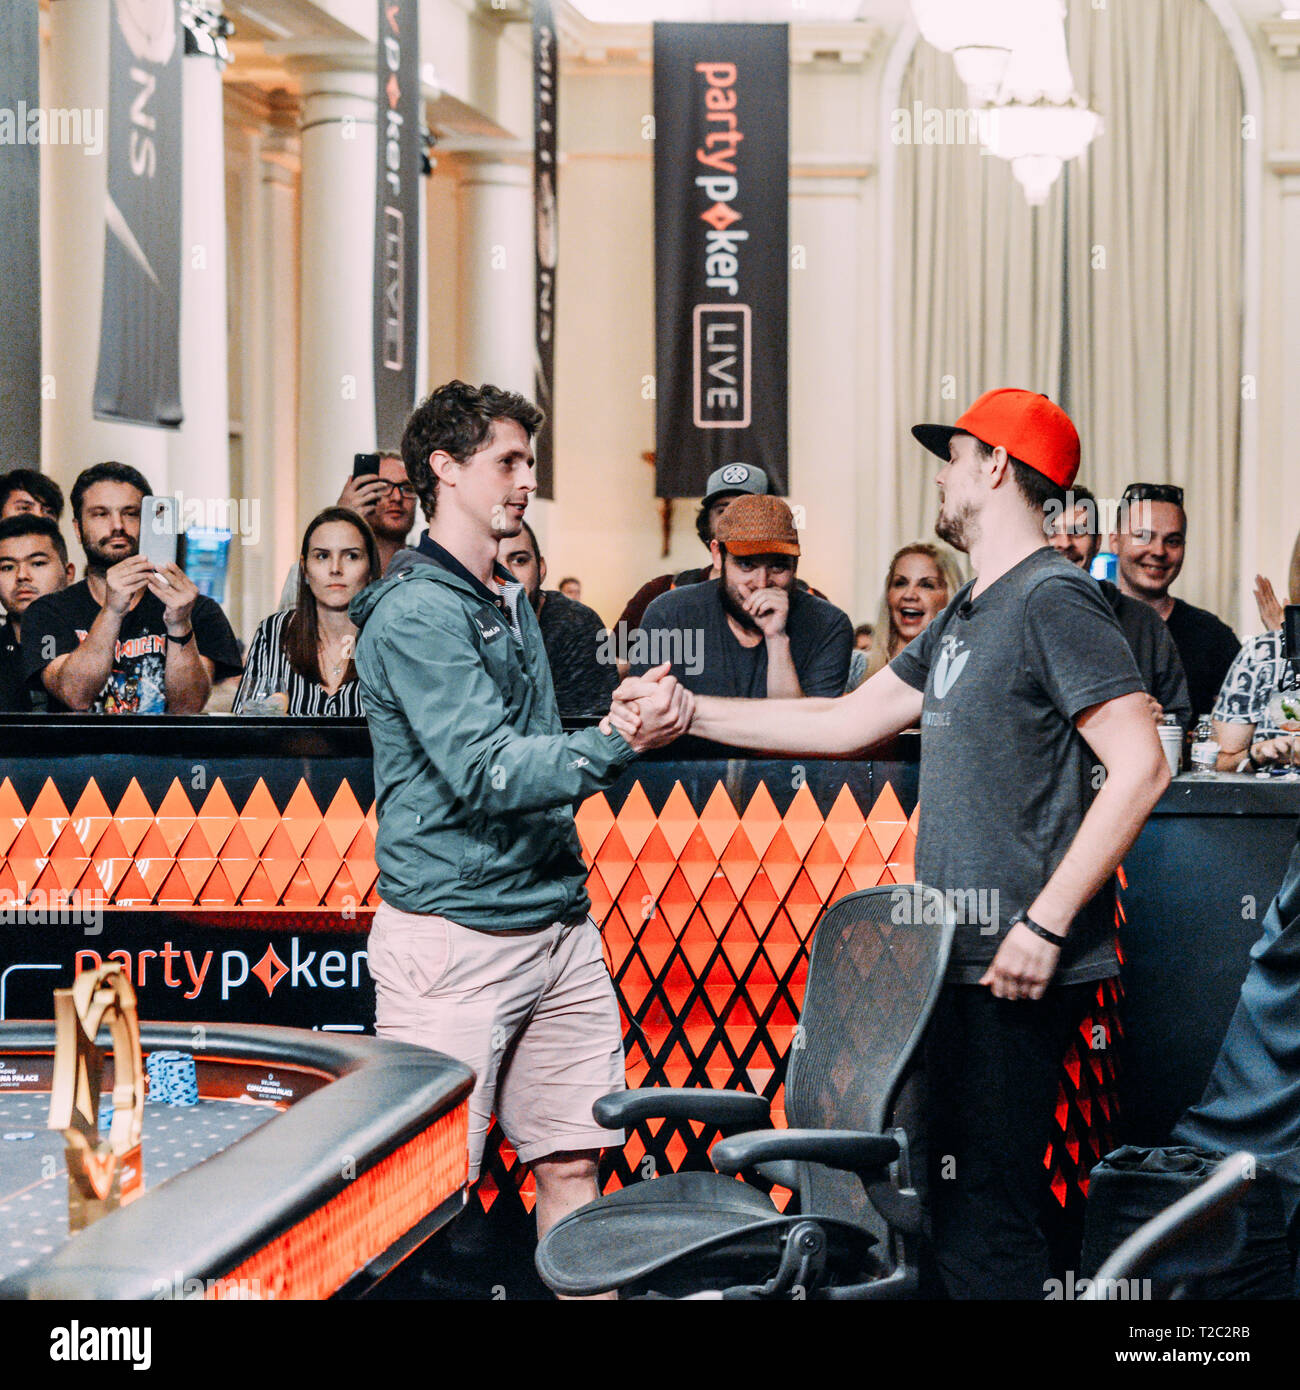 Rio de Janeiro, Brazil - March 25, 2019: Final table of the 2019 Partypoker LIVE MILLIONS South America festival at the luxurious Copacabana Palace Stock Photo